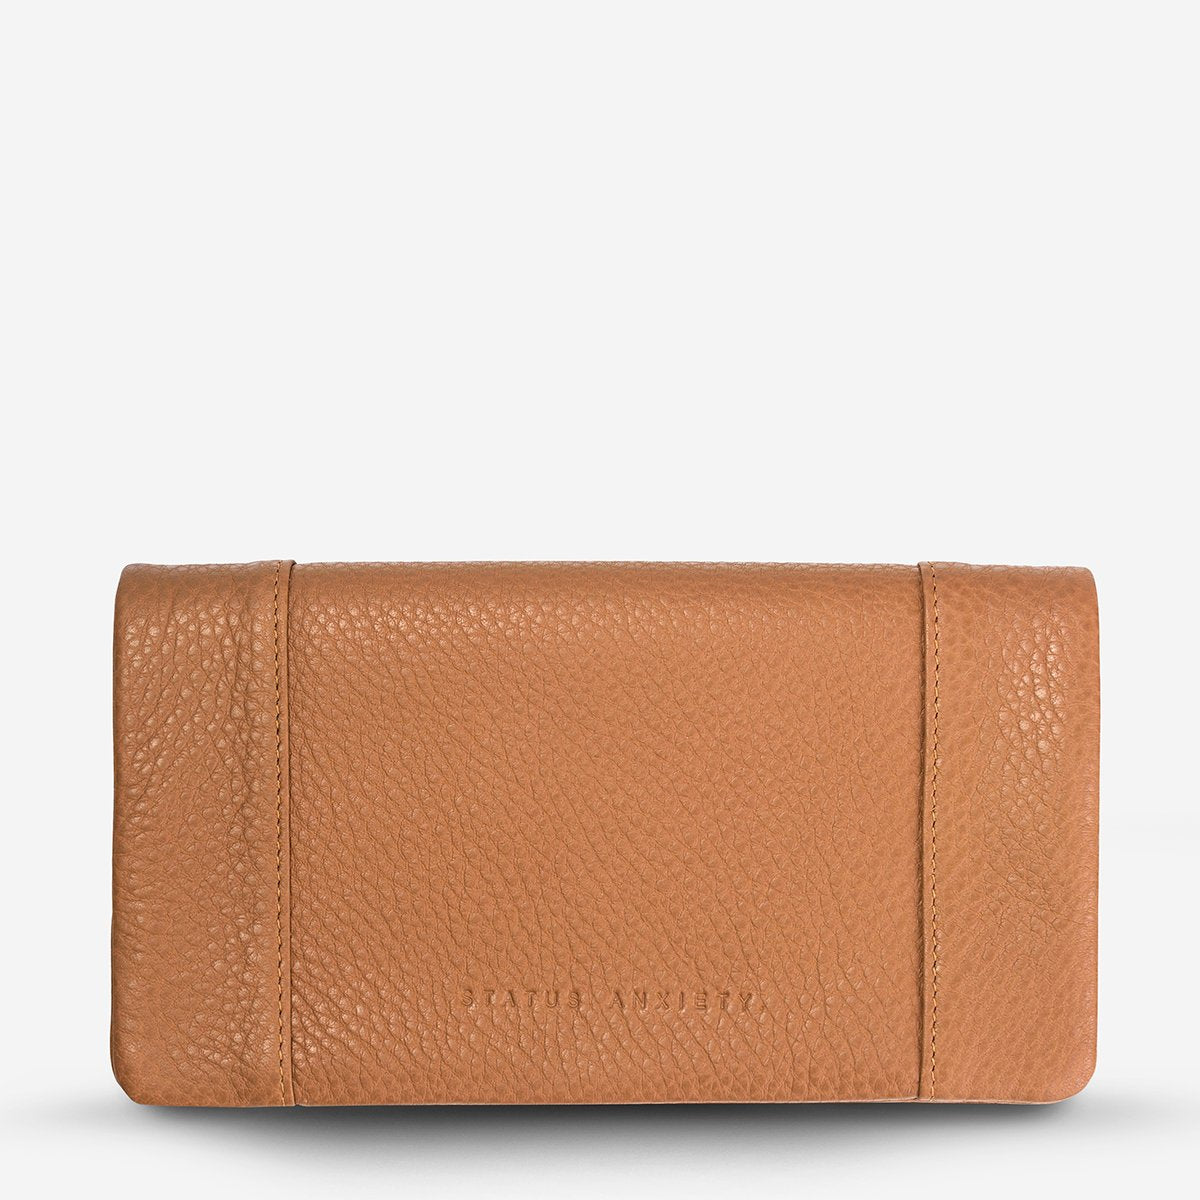 Status Anxiety Some Type of Love Wallet in Tan Front View